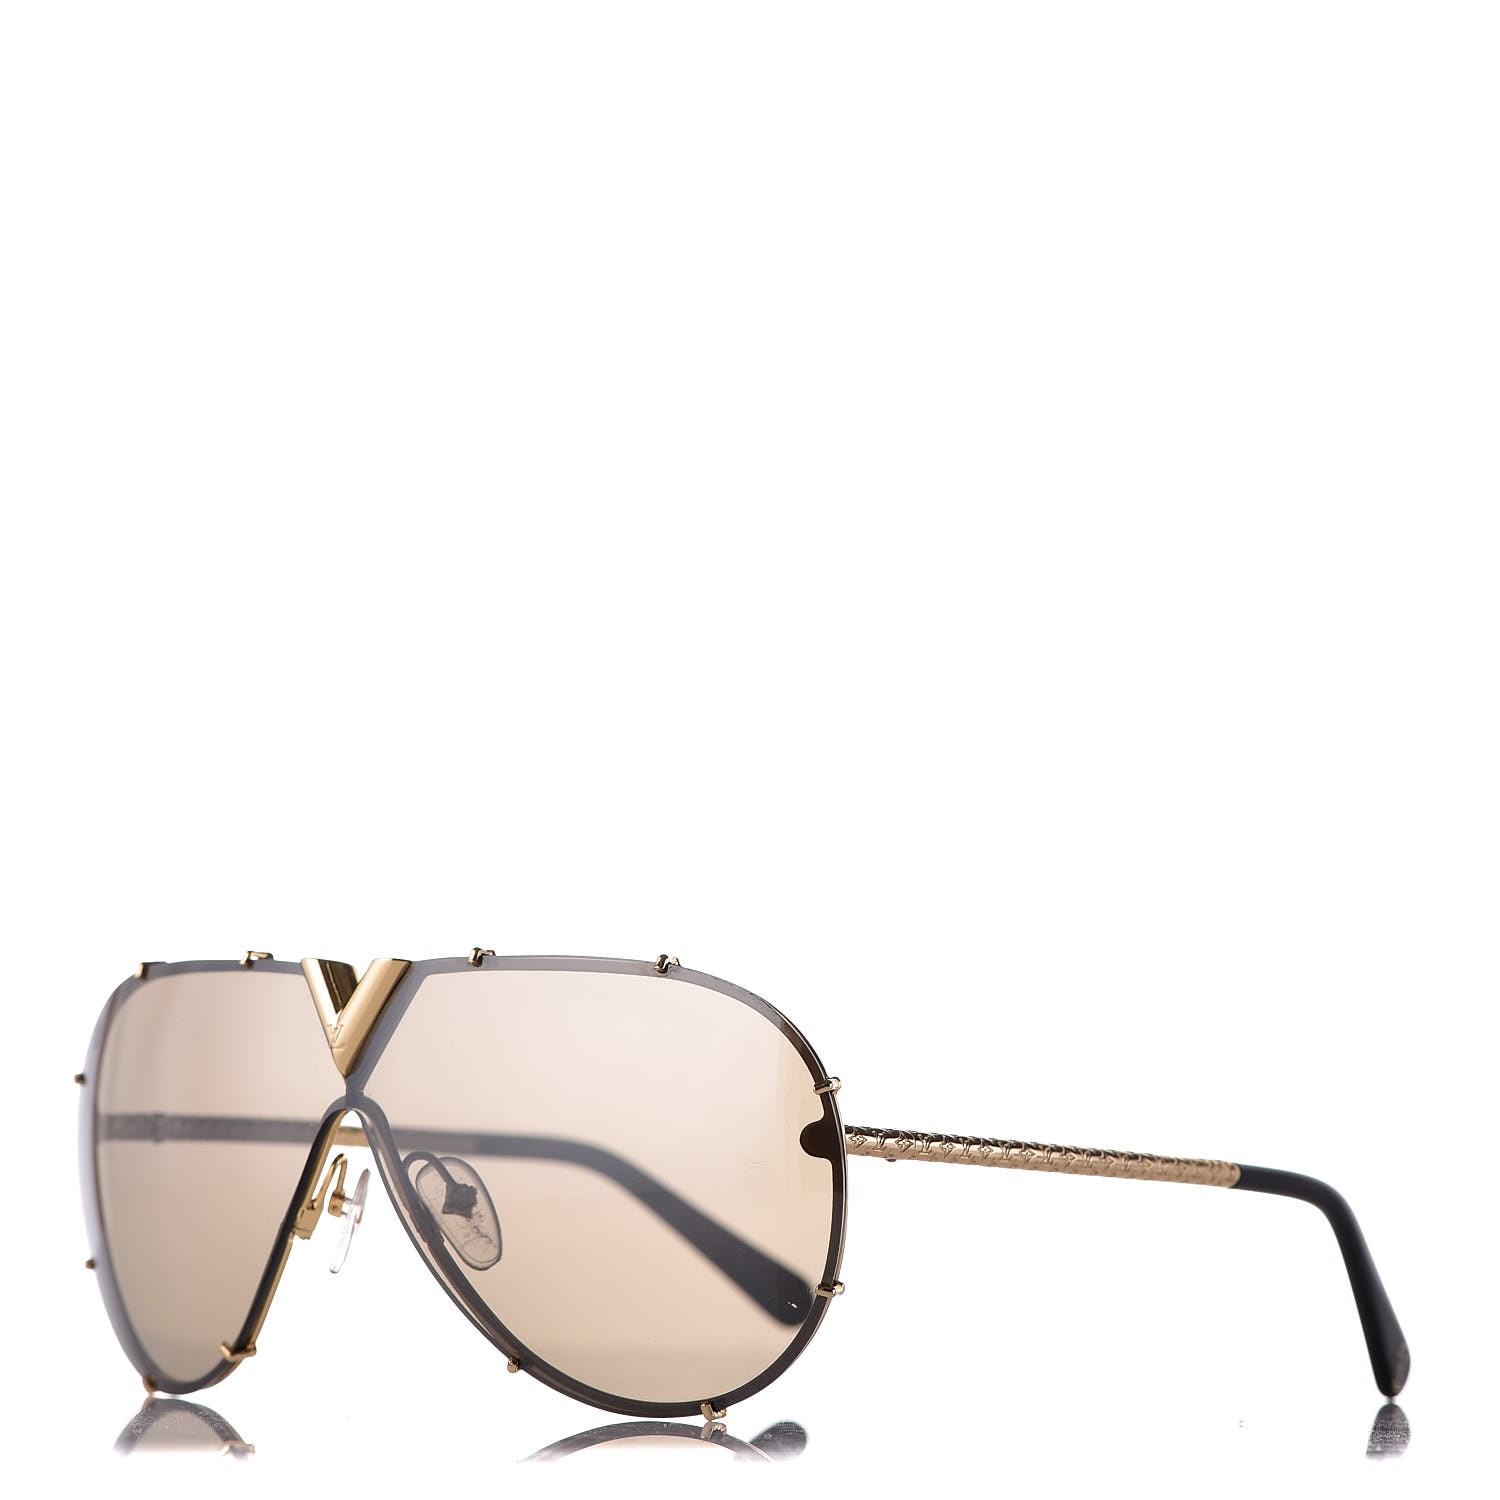 Sold at Auction: New in Box Louis Vuitton Aviator Sunglasses